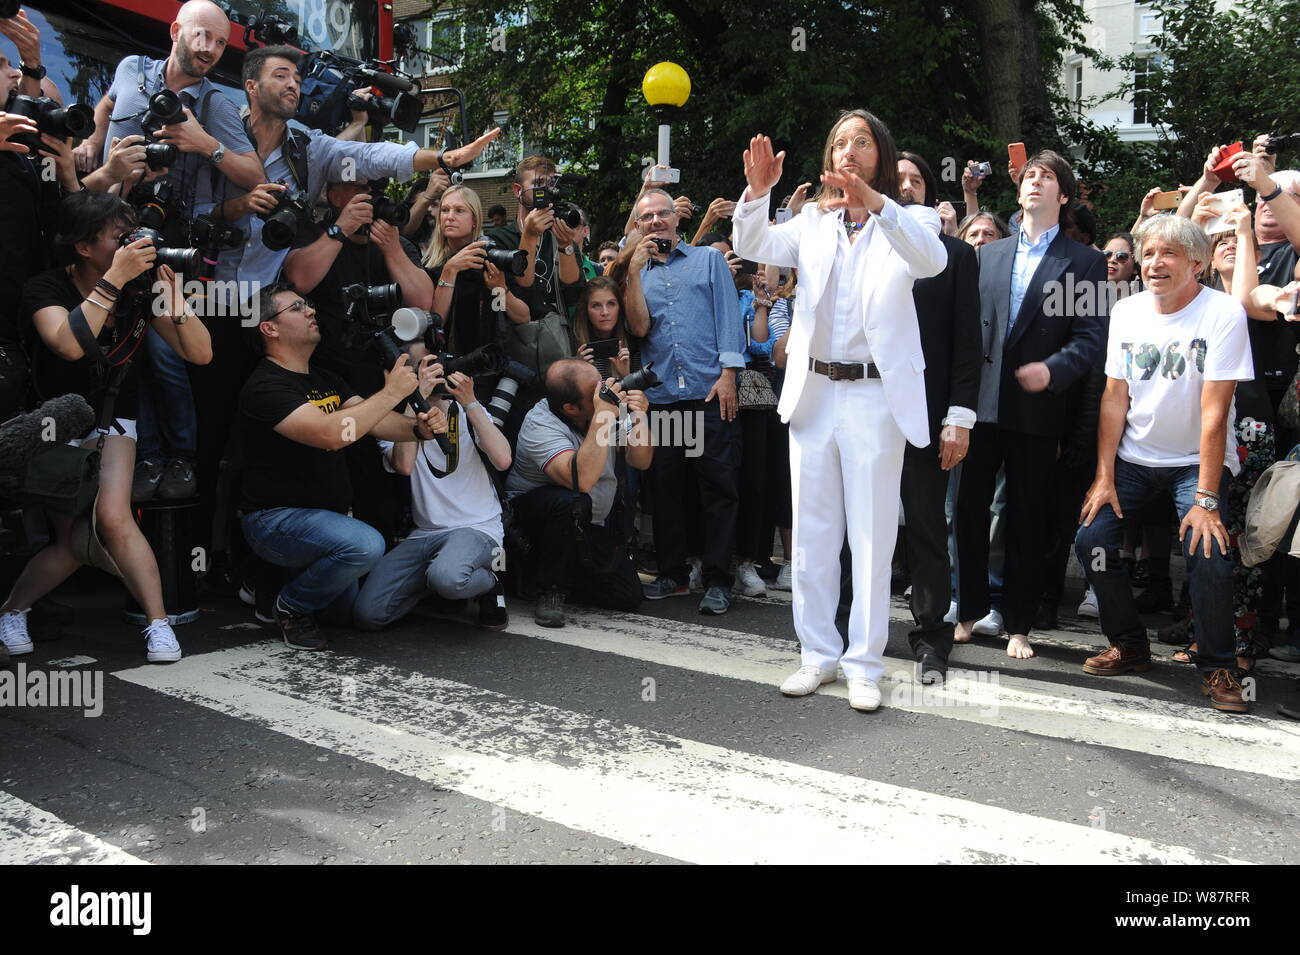 Abbey Road crossing, NW8, London, UK. Thursday, 8th August, 2019. The Beatles tribute band walk across the zebra crossing in Abbey Road to celebrate the album Abbey Road's 50th anniversary. Credit: David Bronstein/Alamy News Stock Photo